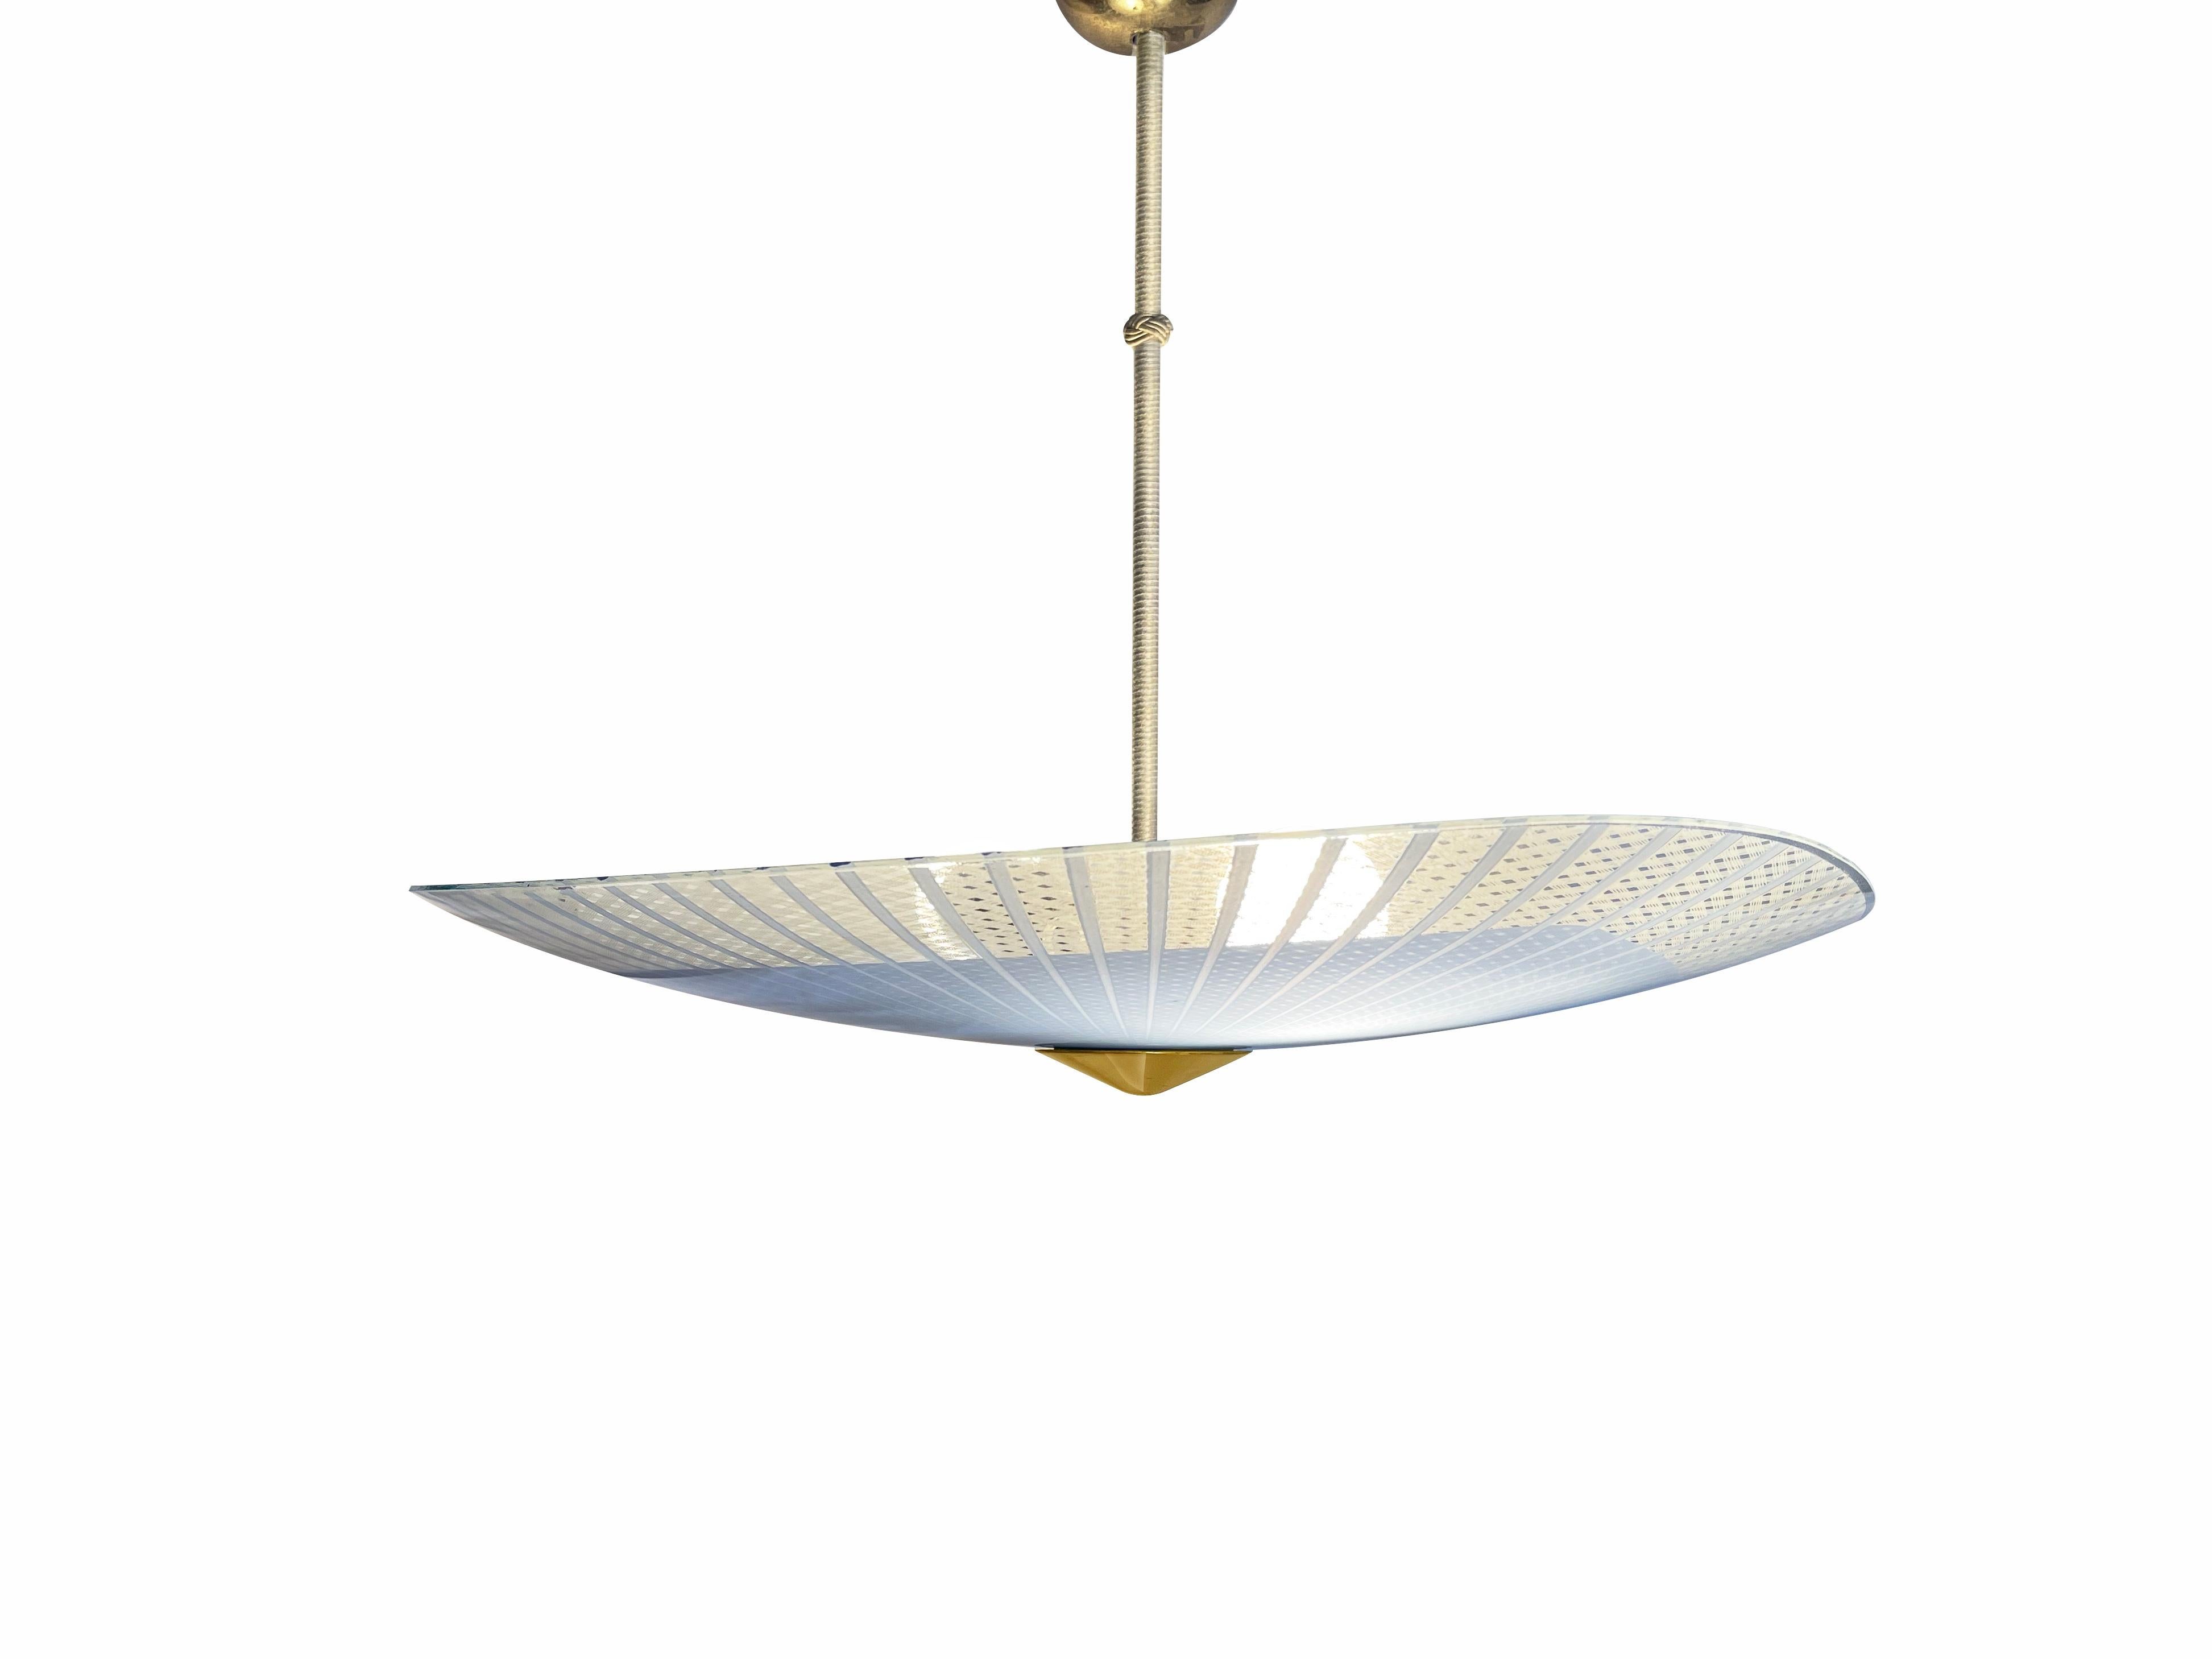 Magnificent ceiling lamp by 'Doria Leuchten', one of Germany's famous mid century manufacturer of high-end design lighting.
Comes in a rounded and elegantly curved triangle disk shape, from cut and printed glass. 
The print colours are a matte white